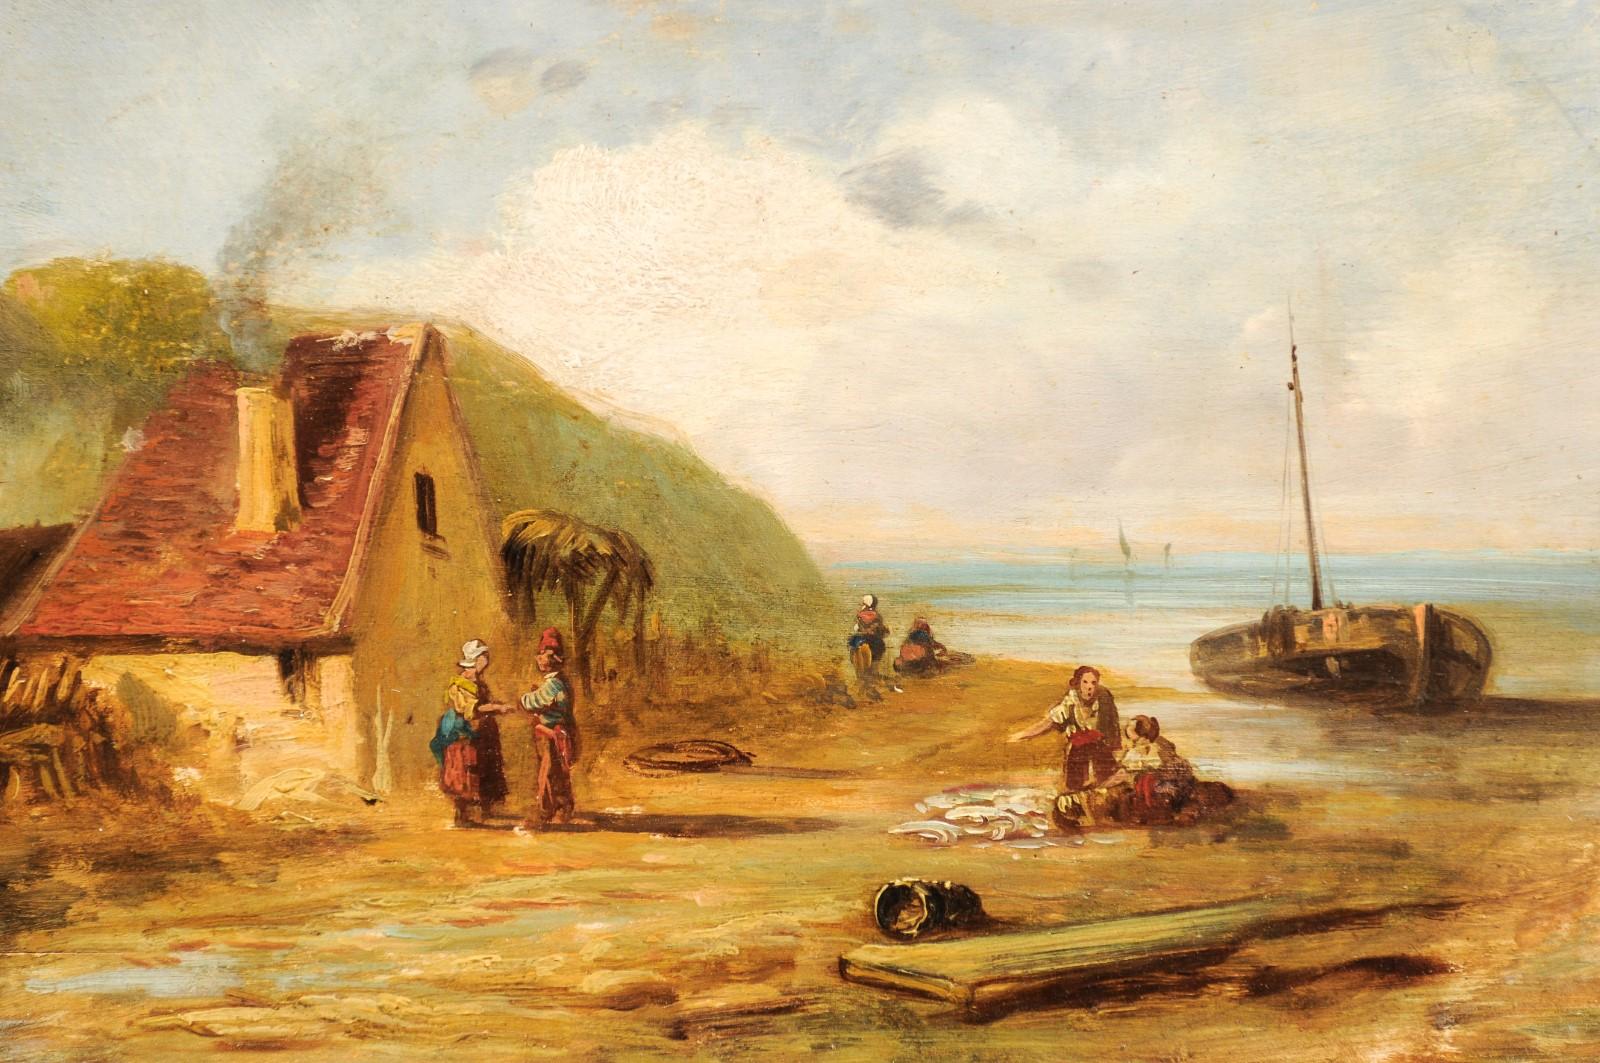 French 19th Century Framed Oil On Panel Painting Depicting a Village by the Sea For Sale 2